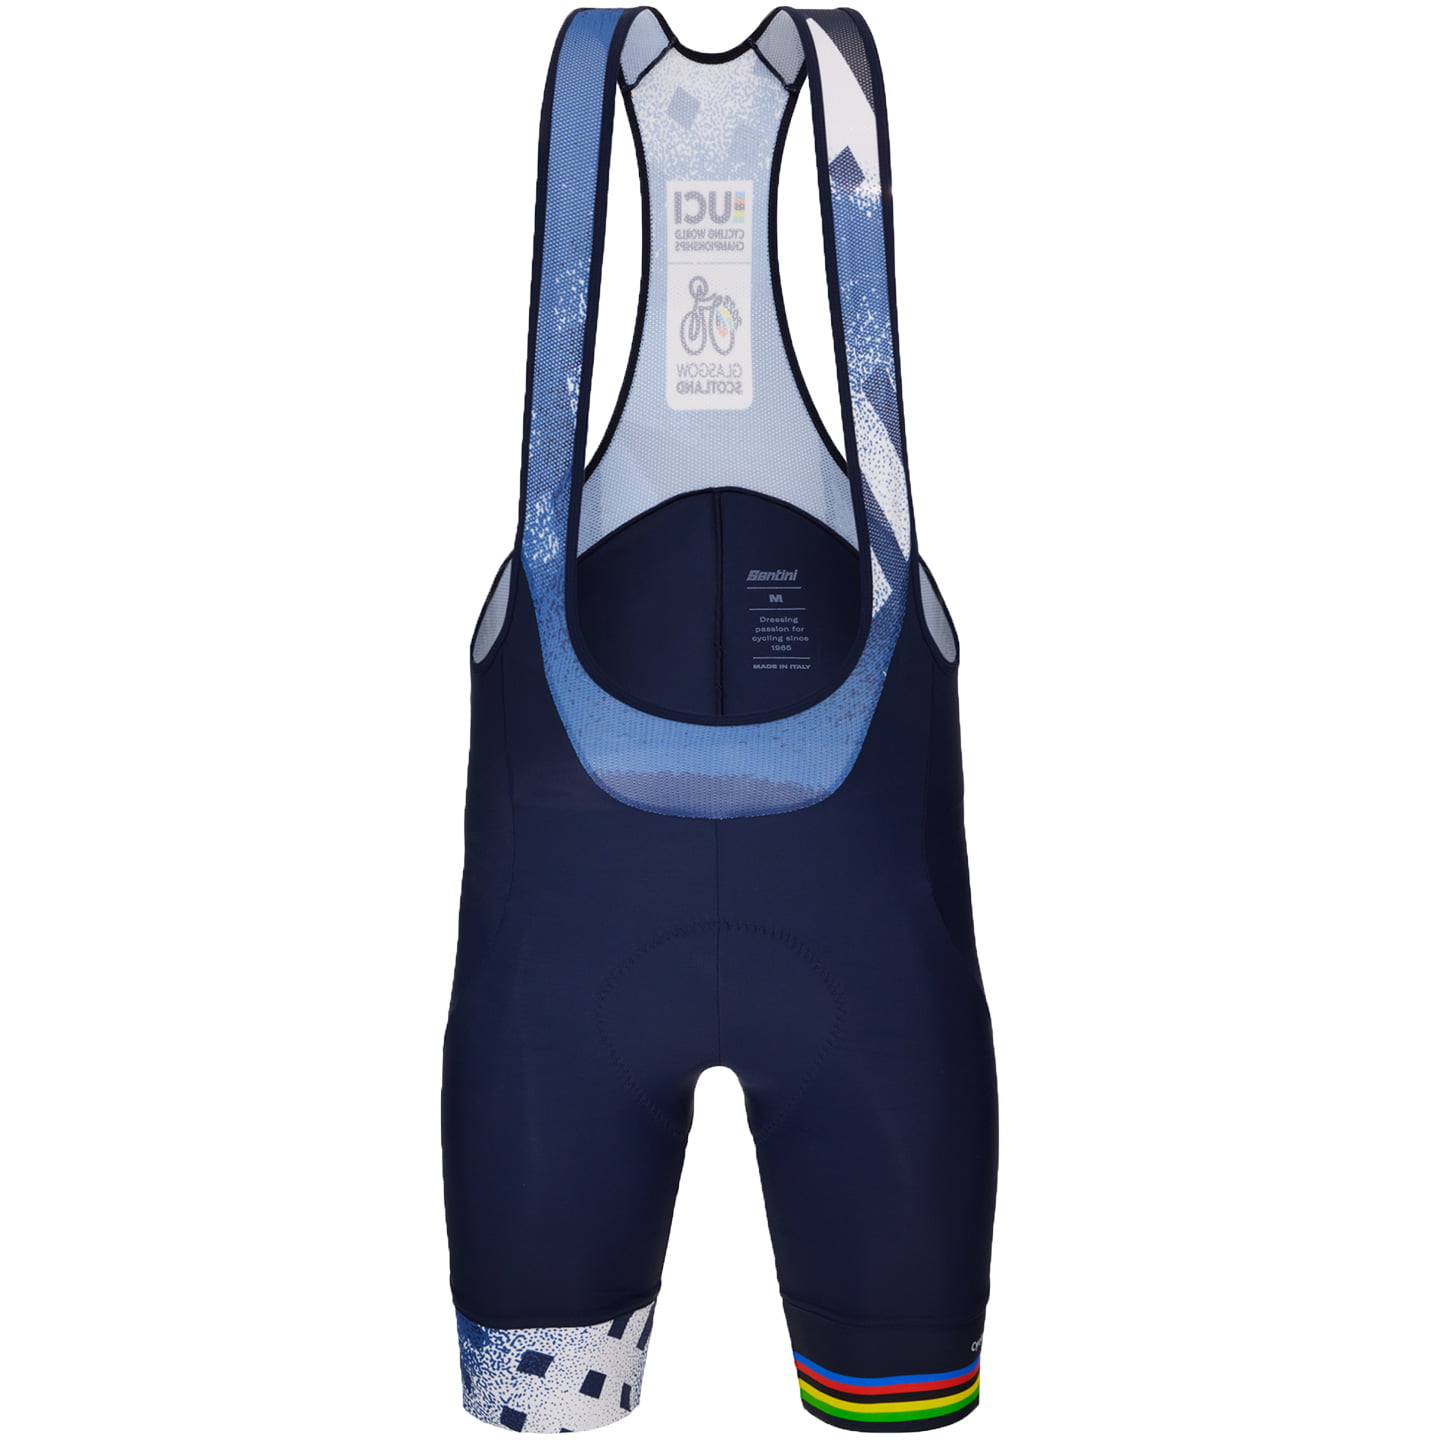 UCI WORLD CHAMPIONSHIP GLASGOW City Grid 2023 Bib Shorts, for men, size 2XL, Cycle trousers, Cycle gear